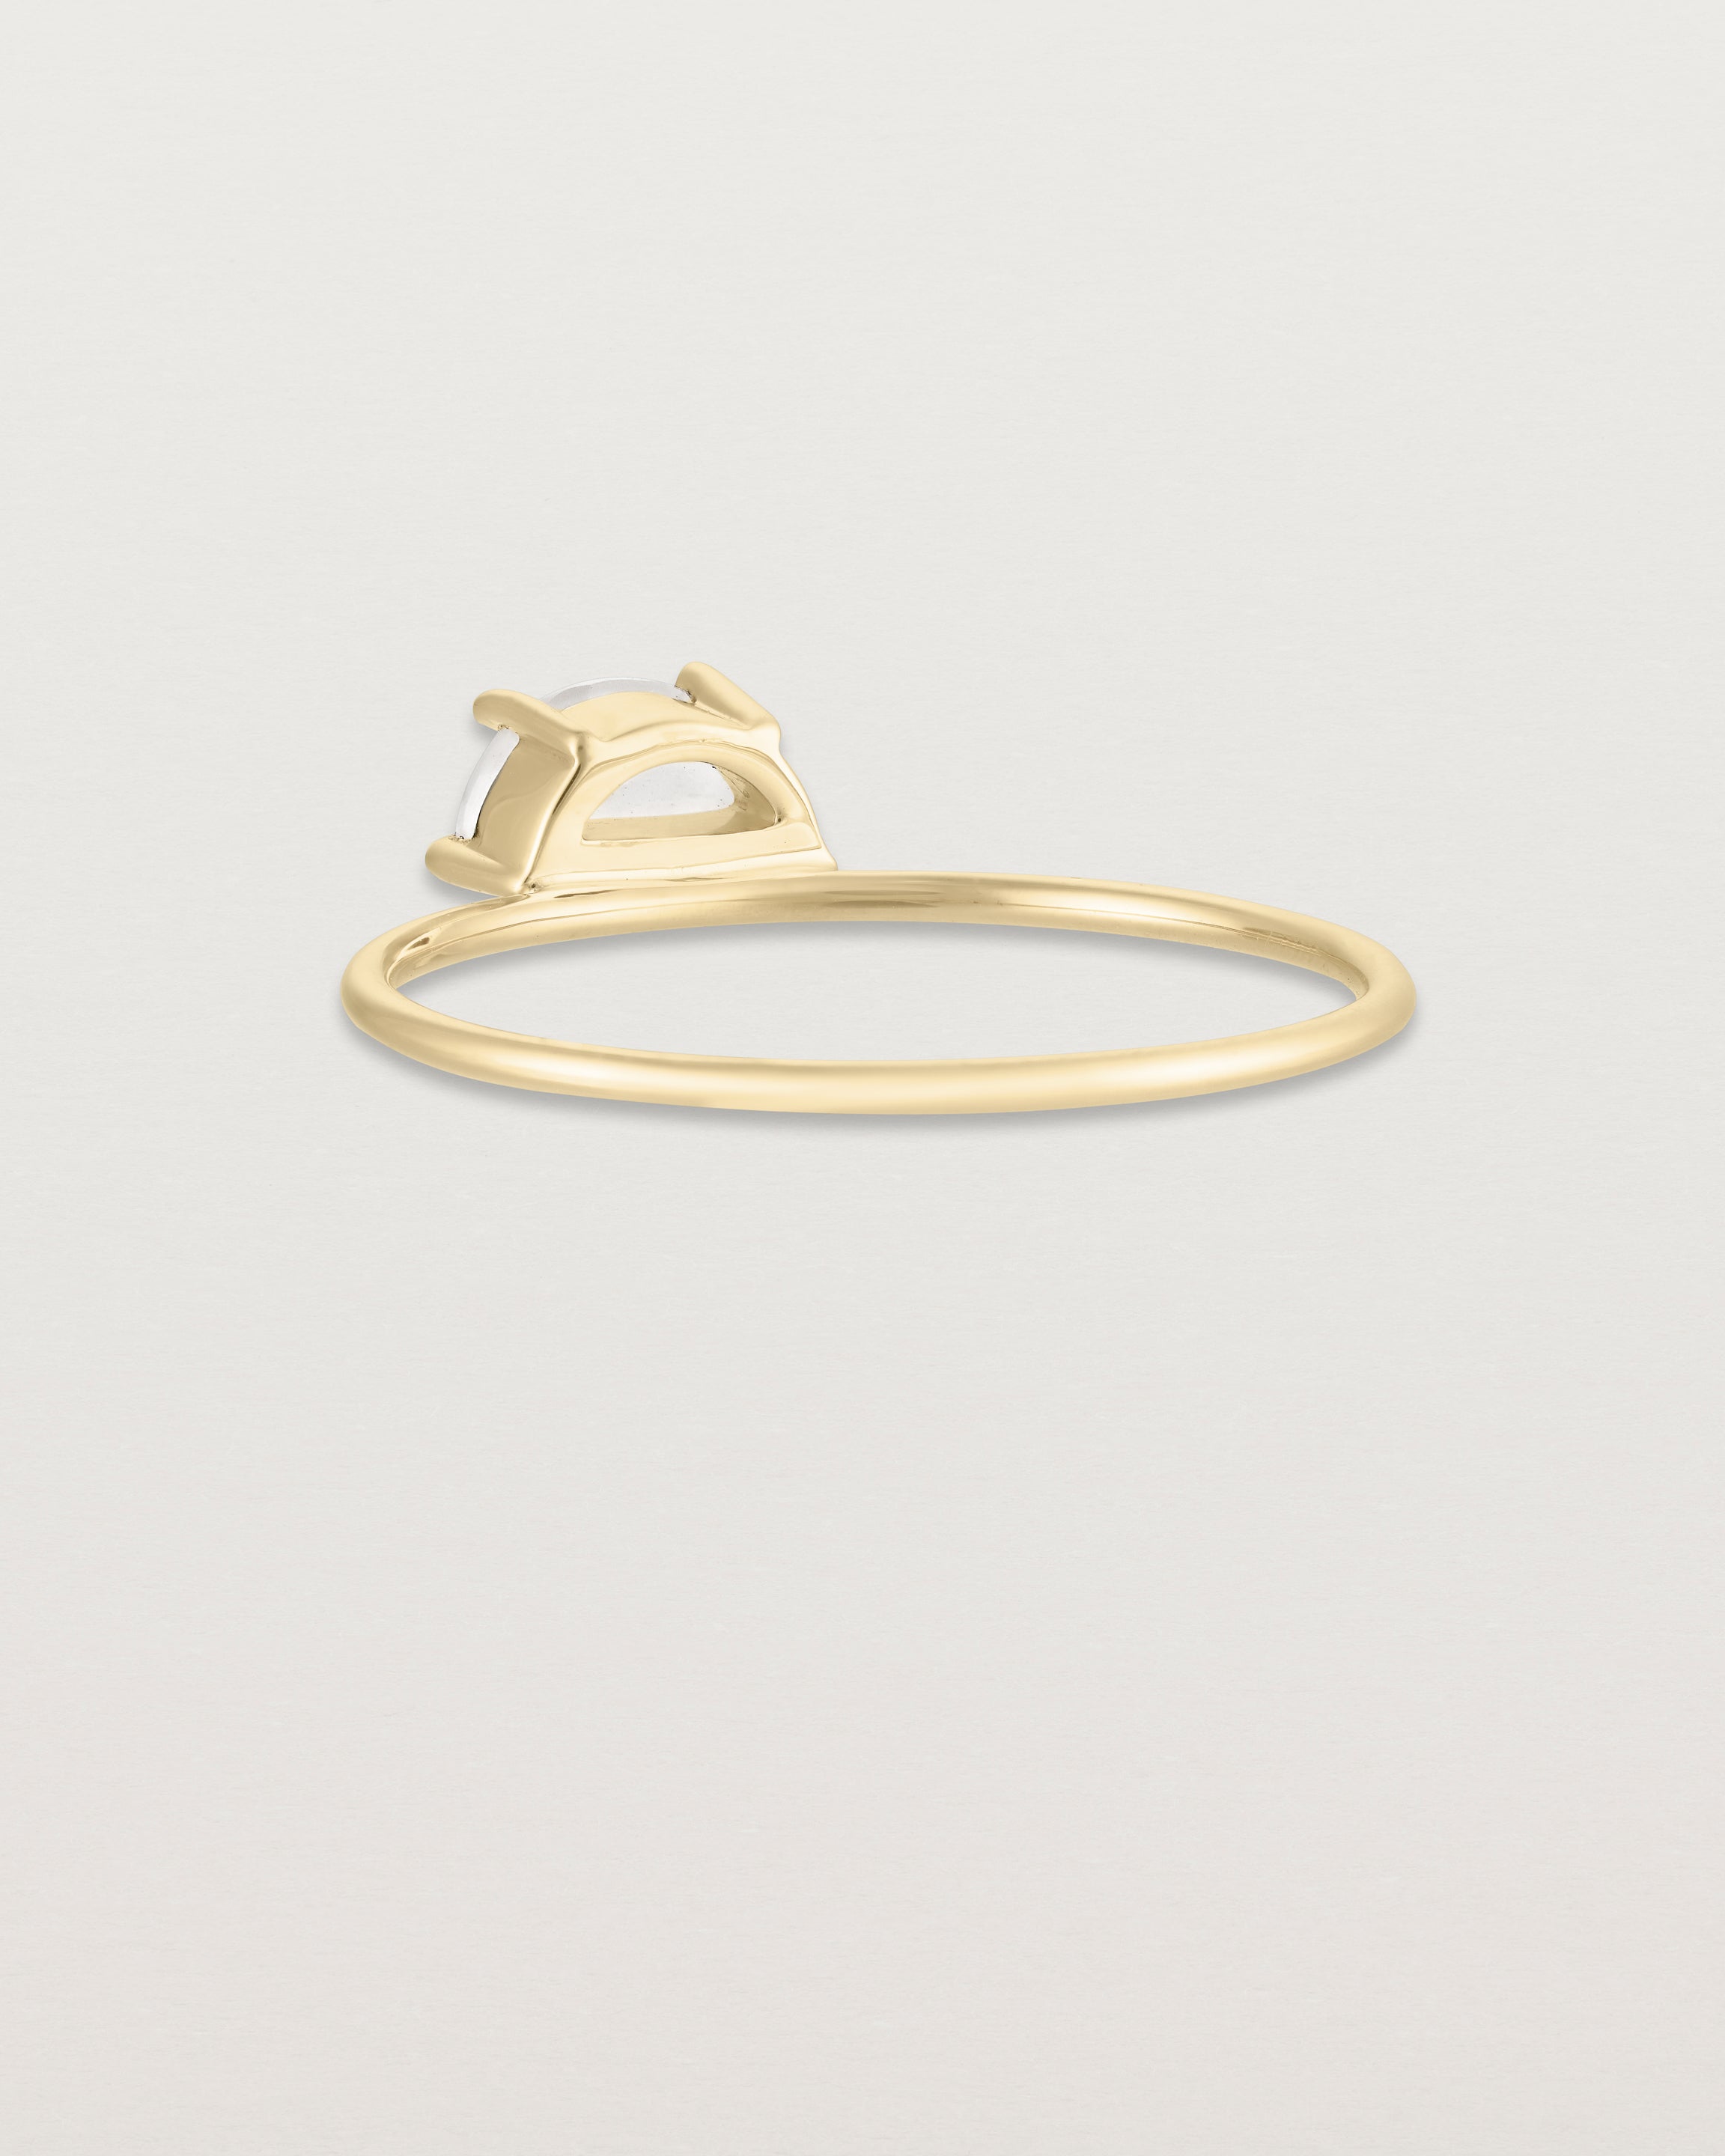 Back view of the Tiny Half Moon Ring | Moonstone in yellow gold.